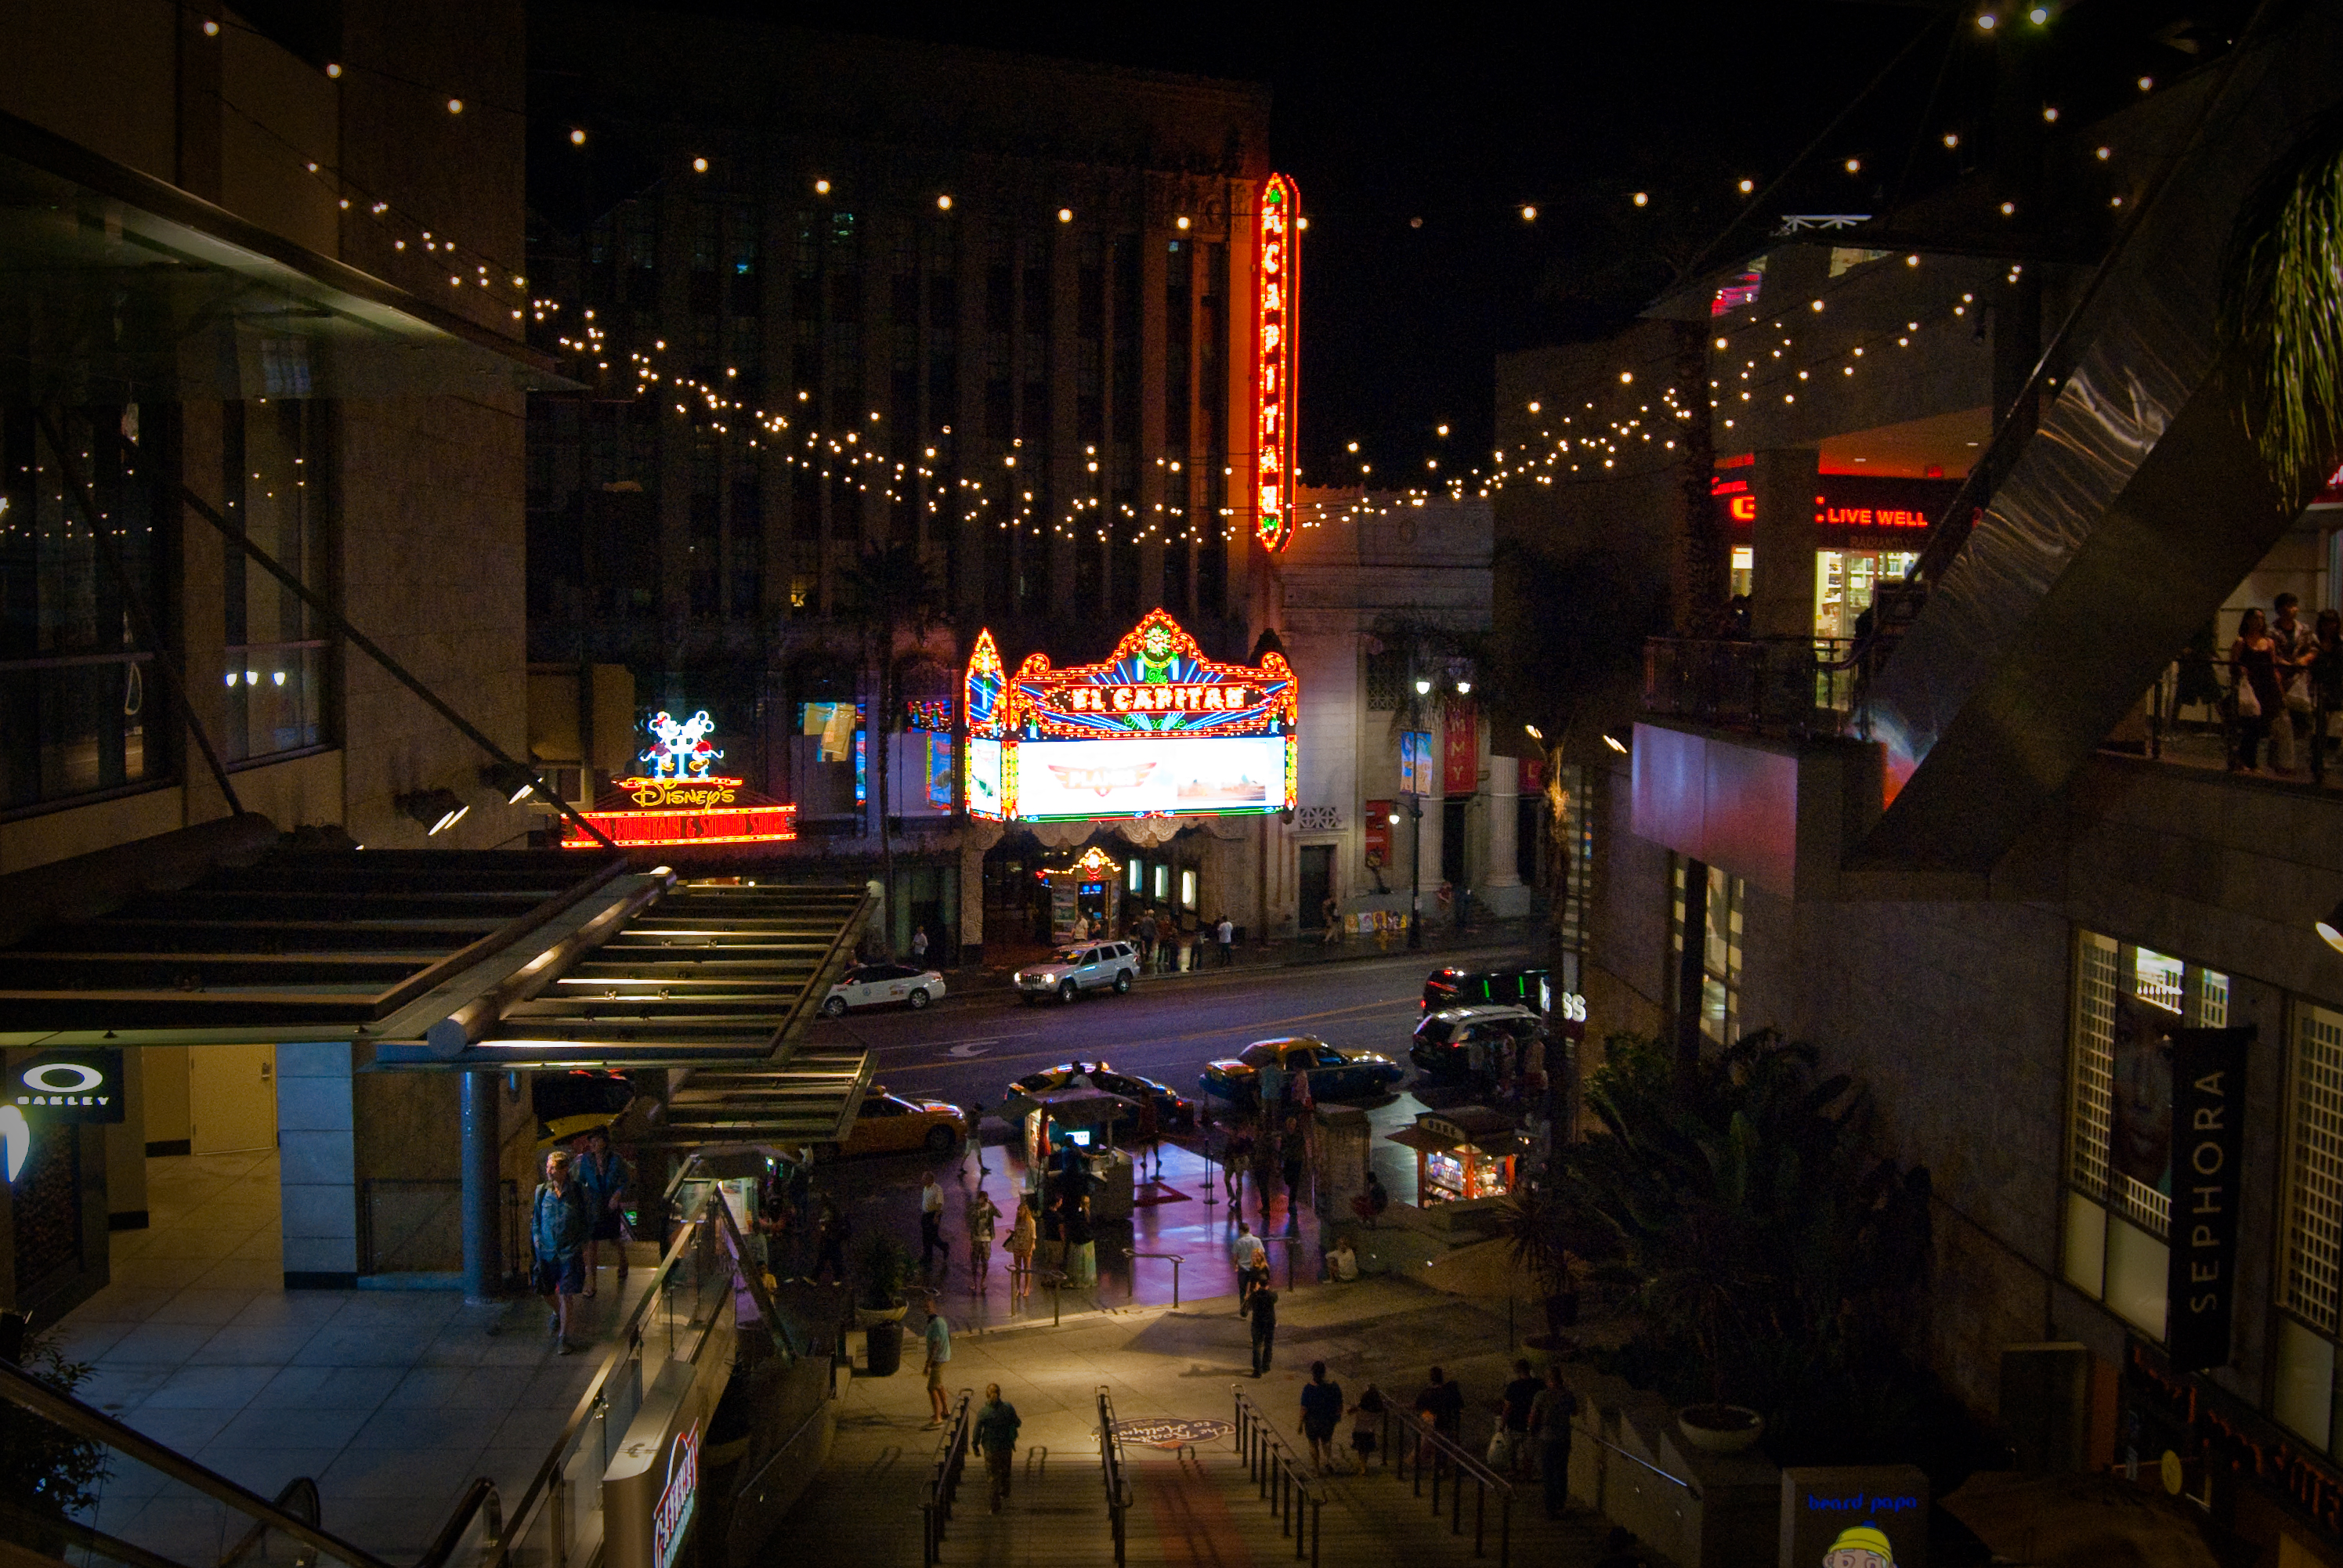 22-AUG-2013: The El Capitan Theater, seen from the steps of Hollywood & Highland.